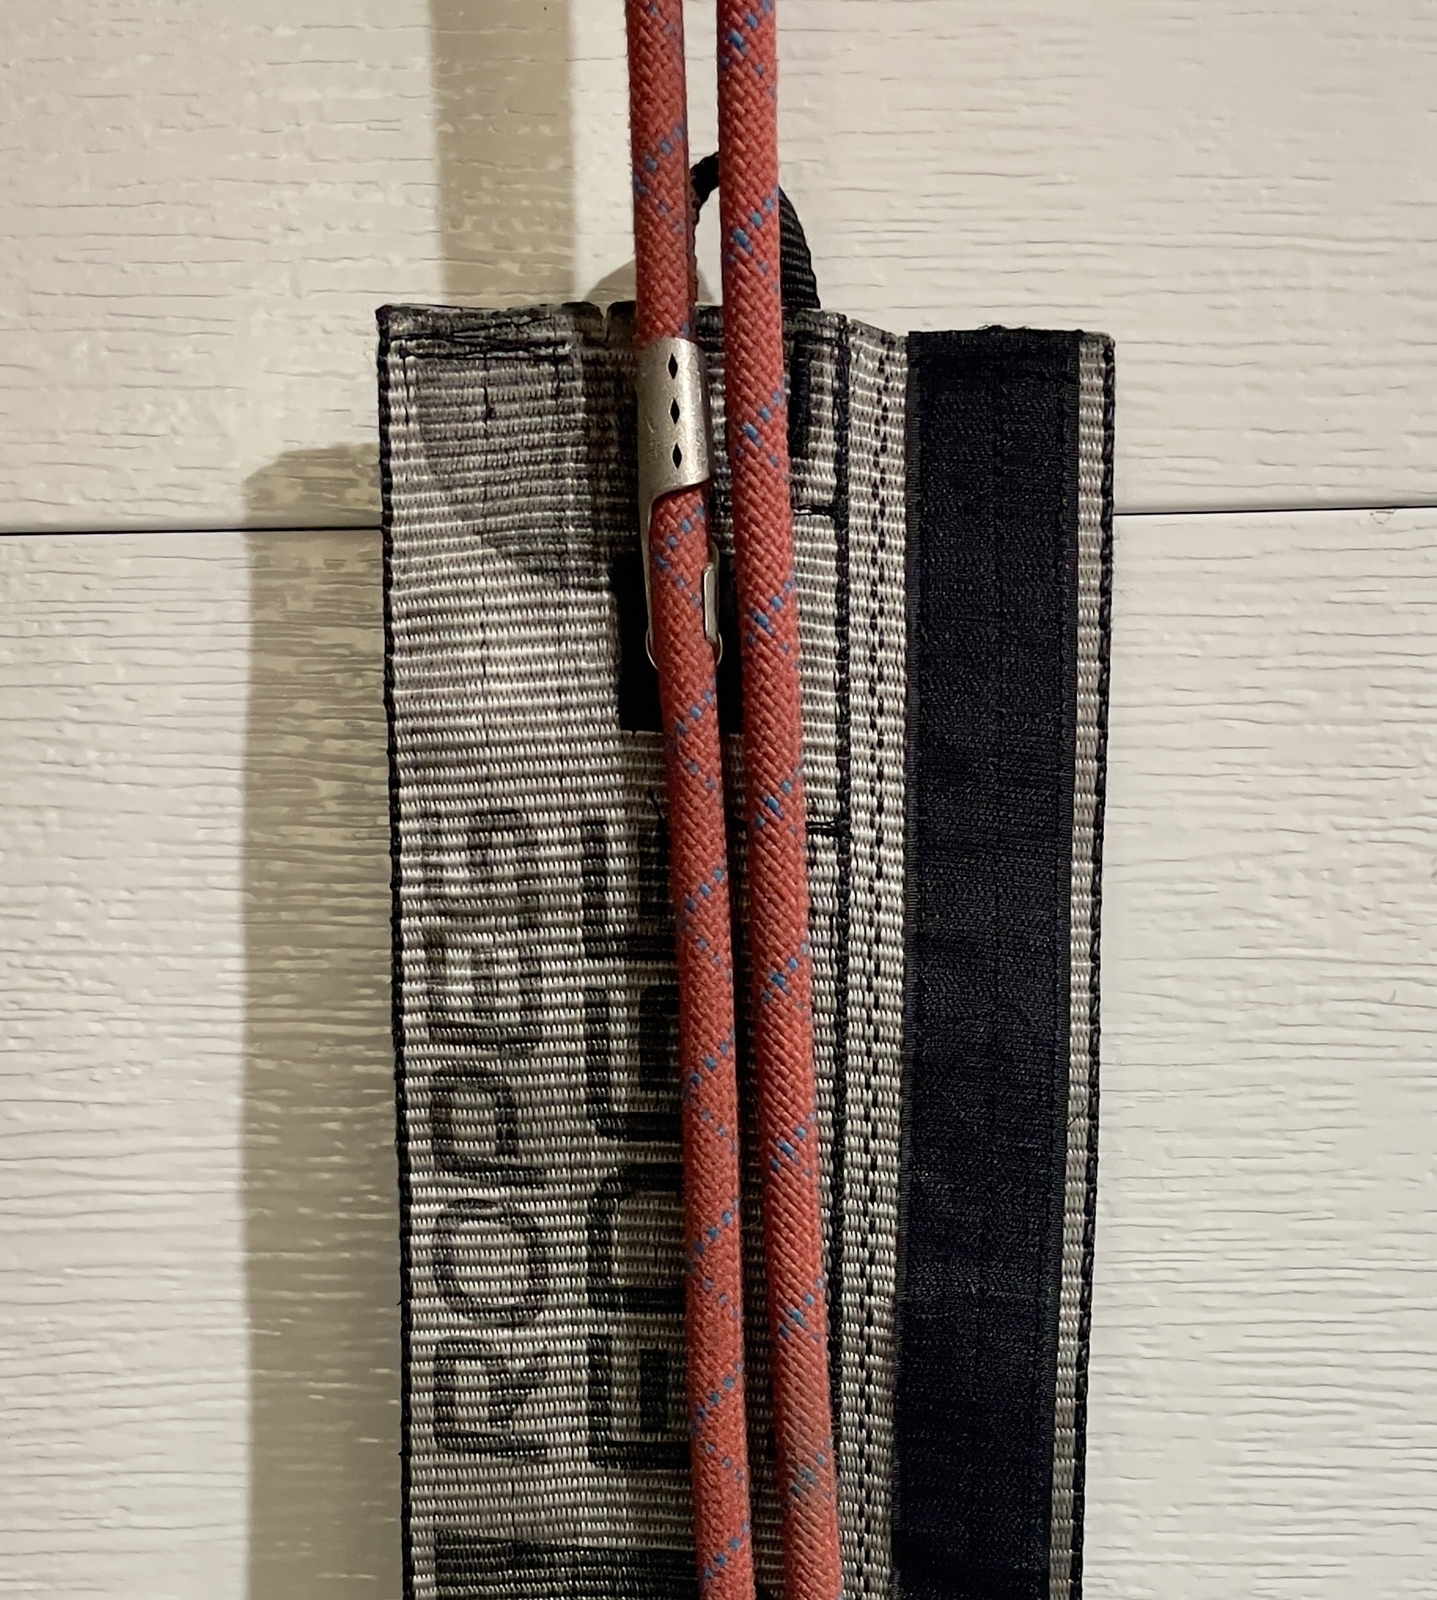 RopesEdge Rope Protector Sleeves W/ The ProClip